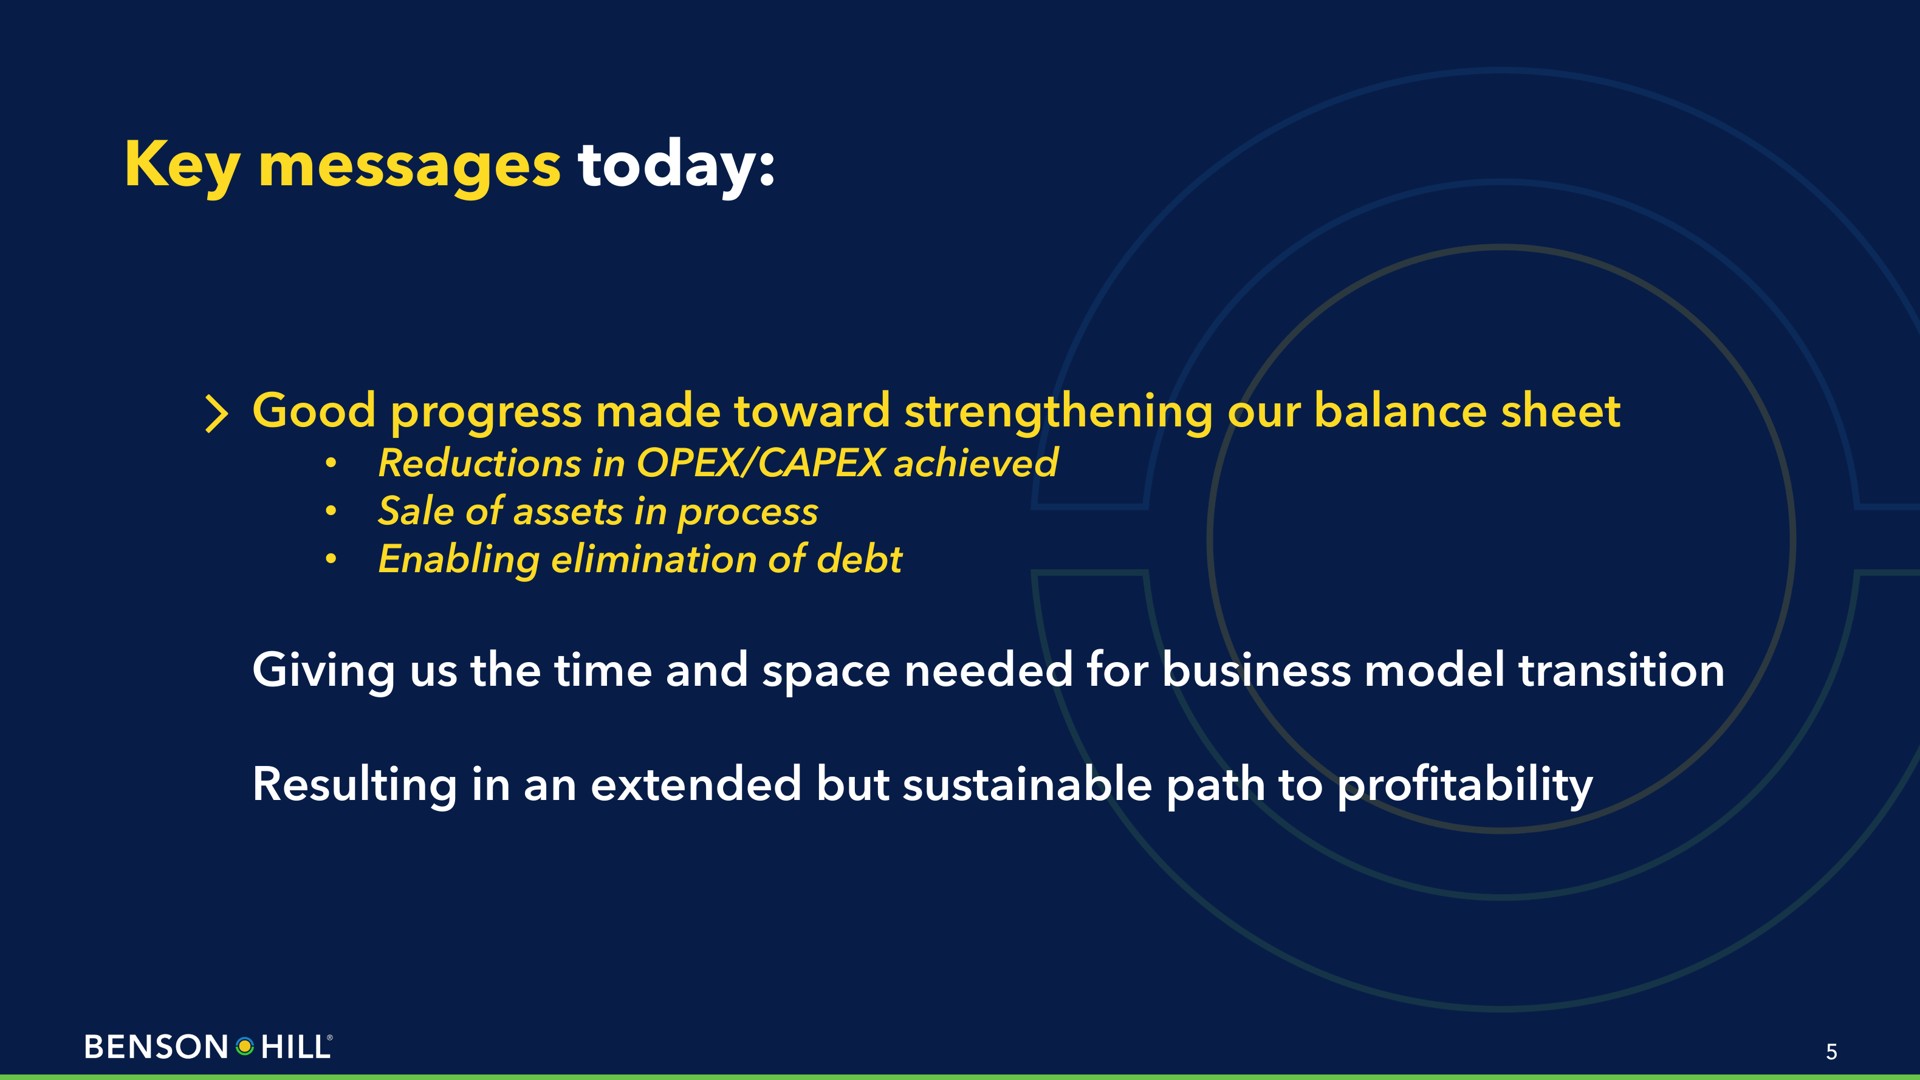 key messages today good progress made toward strengthening our balance sheet giving us the time and space needed for business model transition resulting in an extended but sustainable path to profitability | Benson Hill